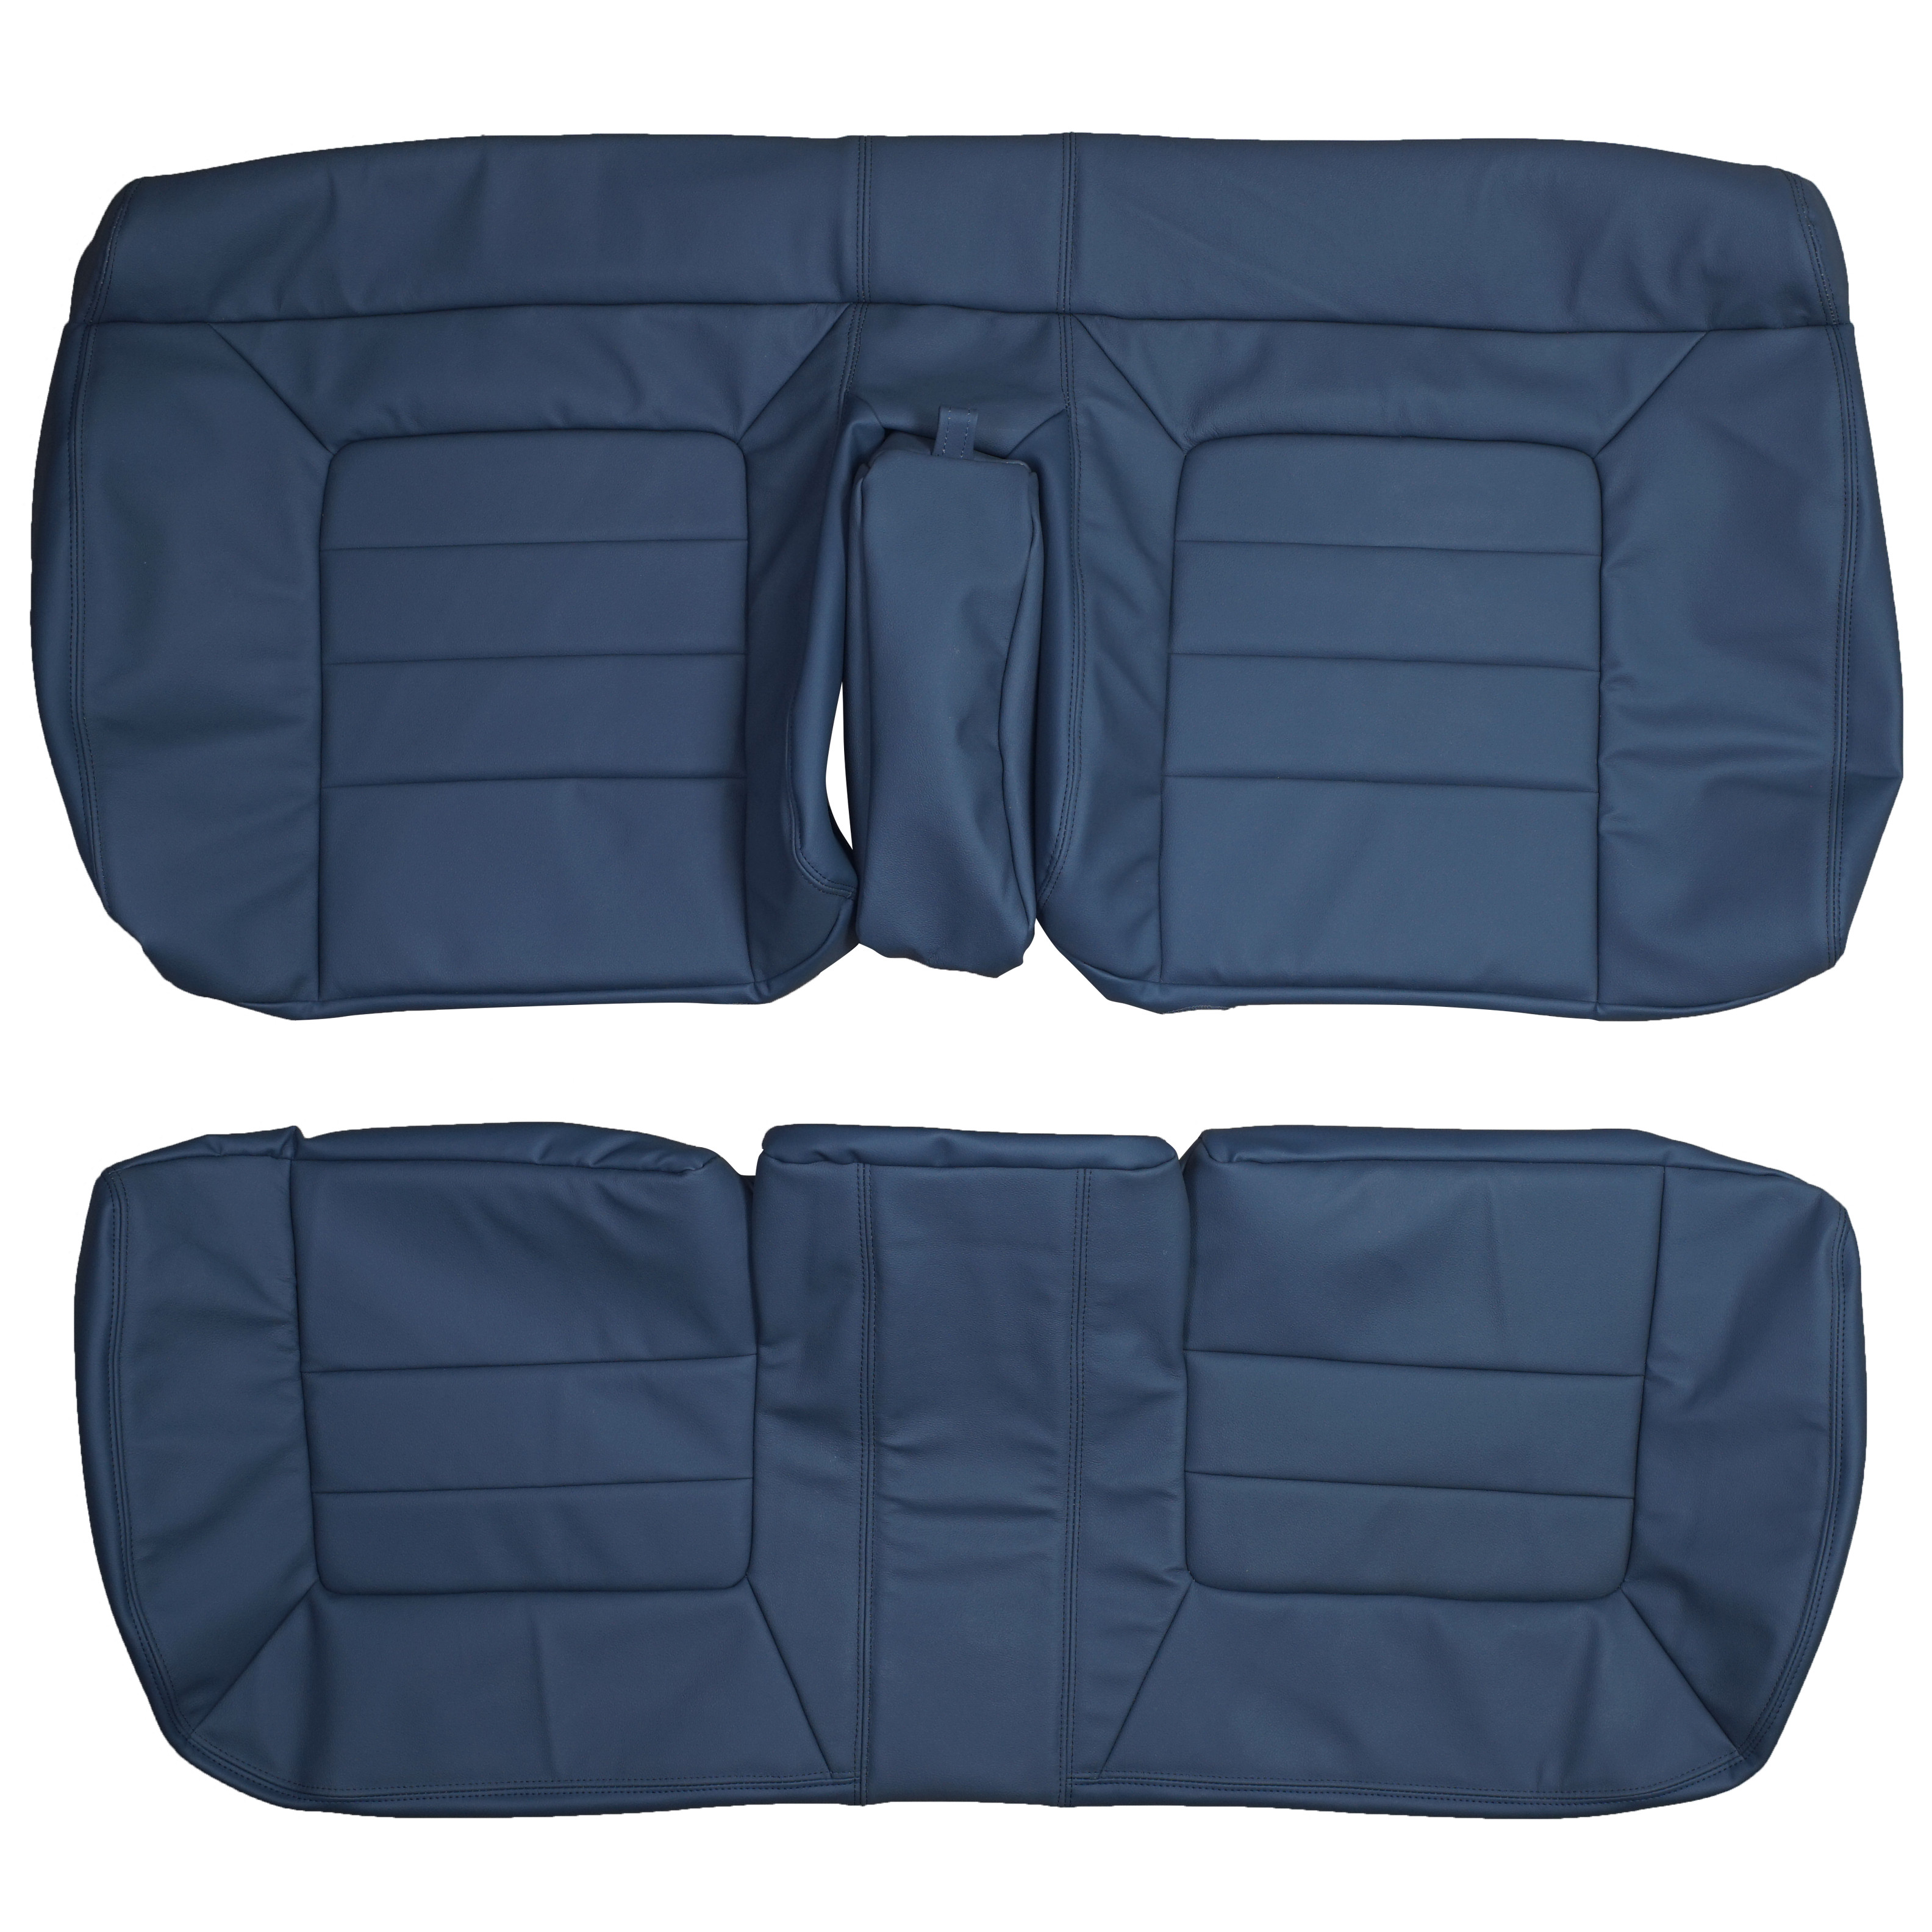 1994-1996 Cadillac Deville Custom Real Leather Seat Covers (Rear) -  Lseat.com